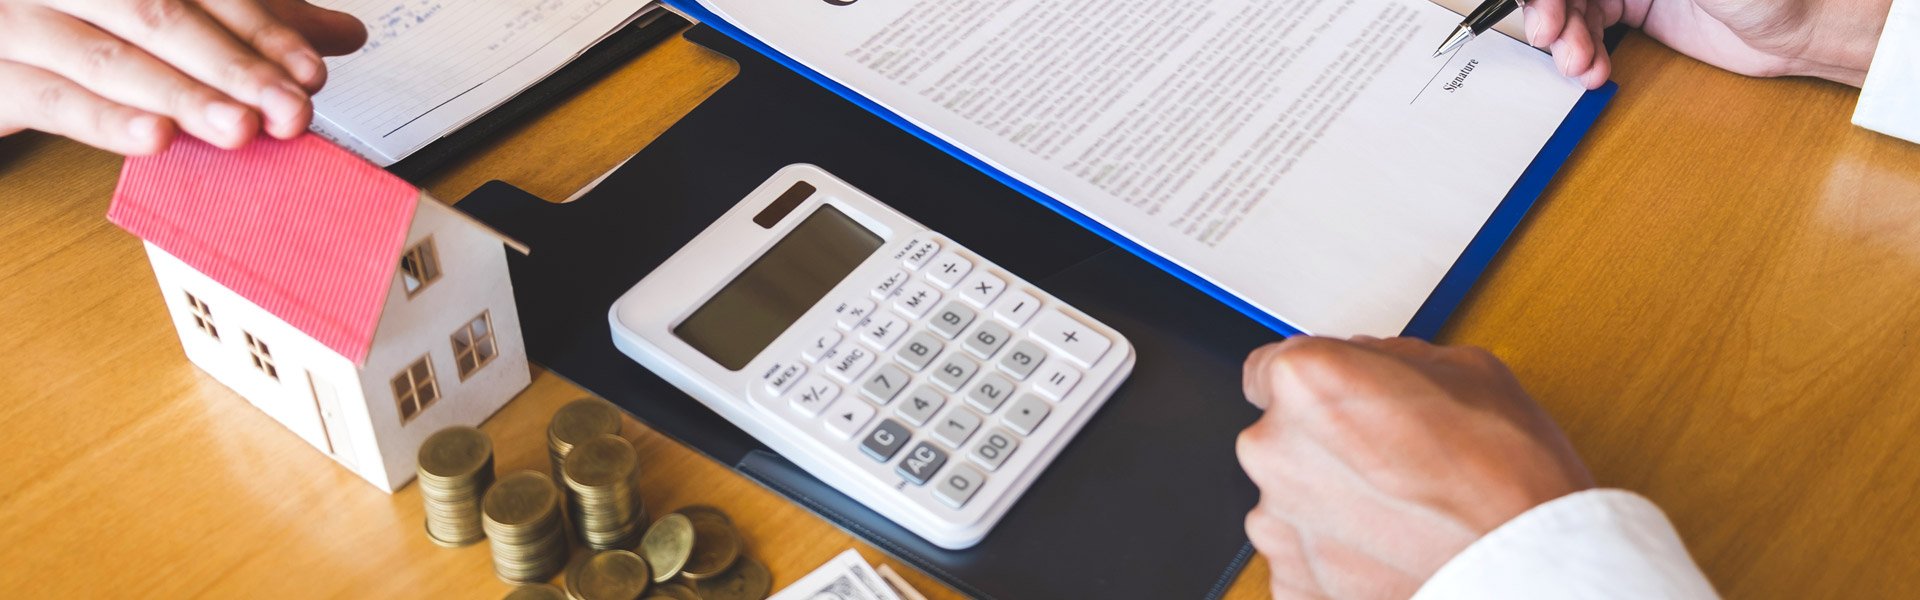 calculator, coins, and a small model home on a desk